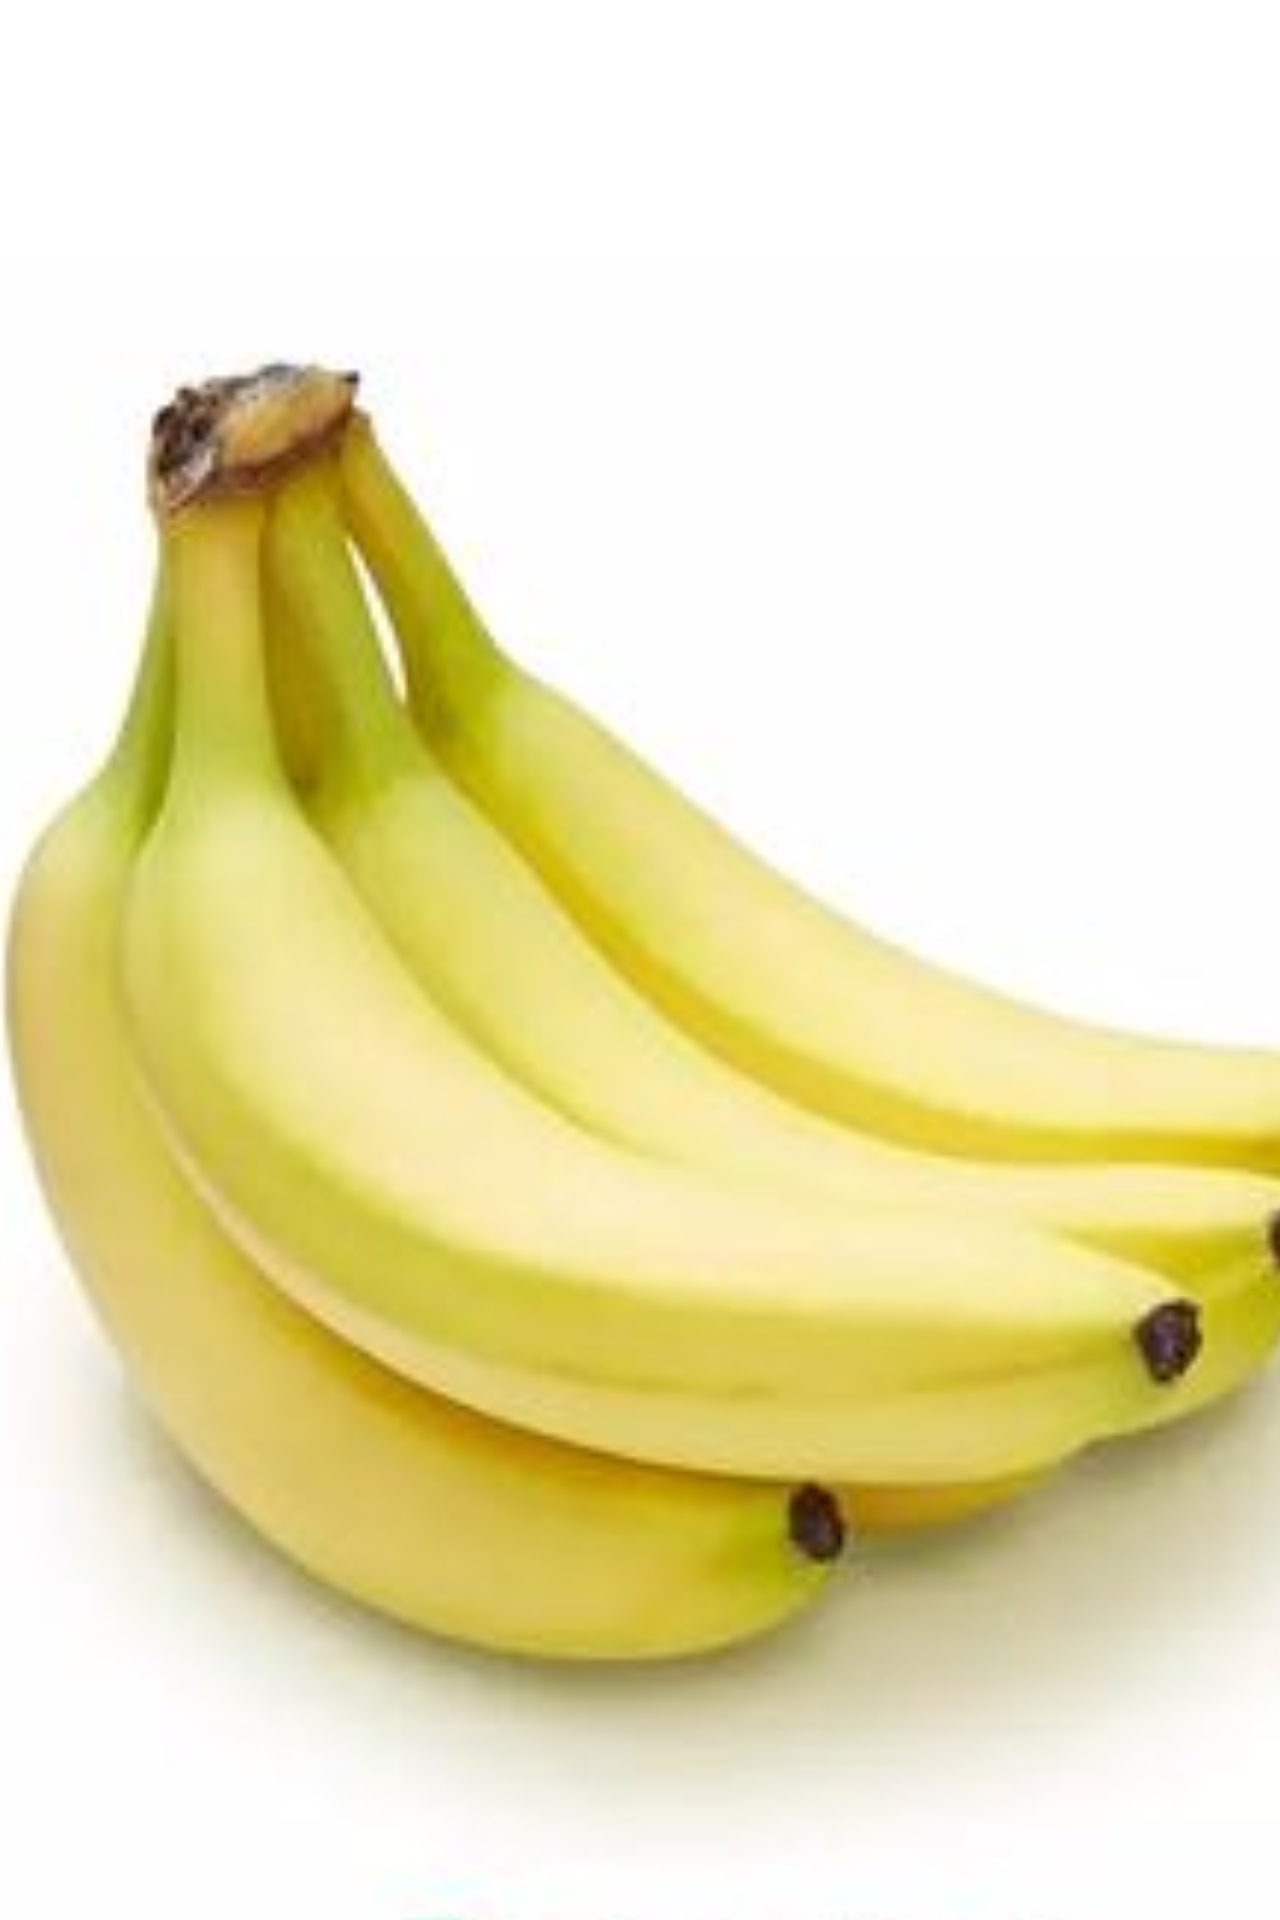 Keep these 5 things in mind before eating a banana